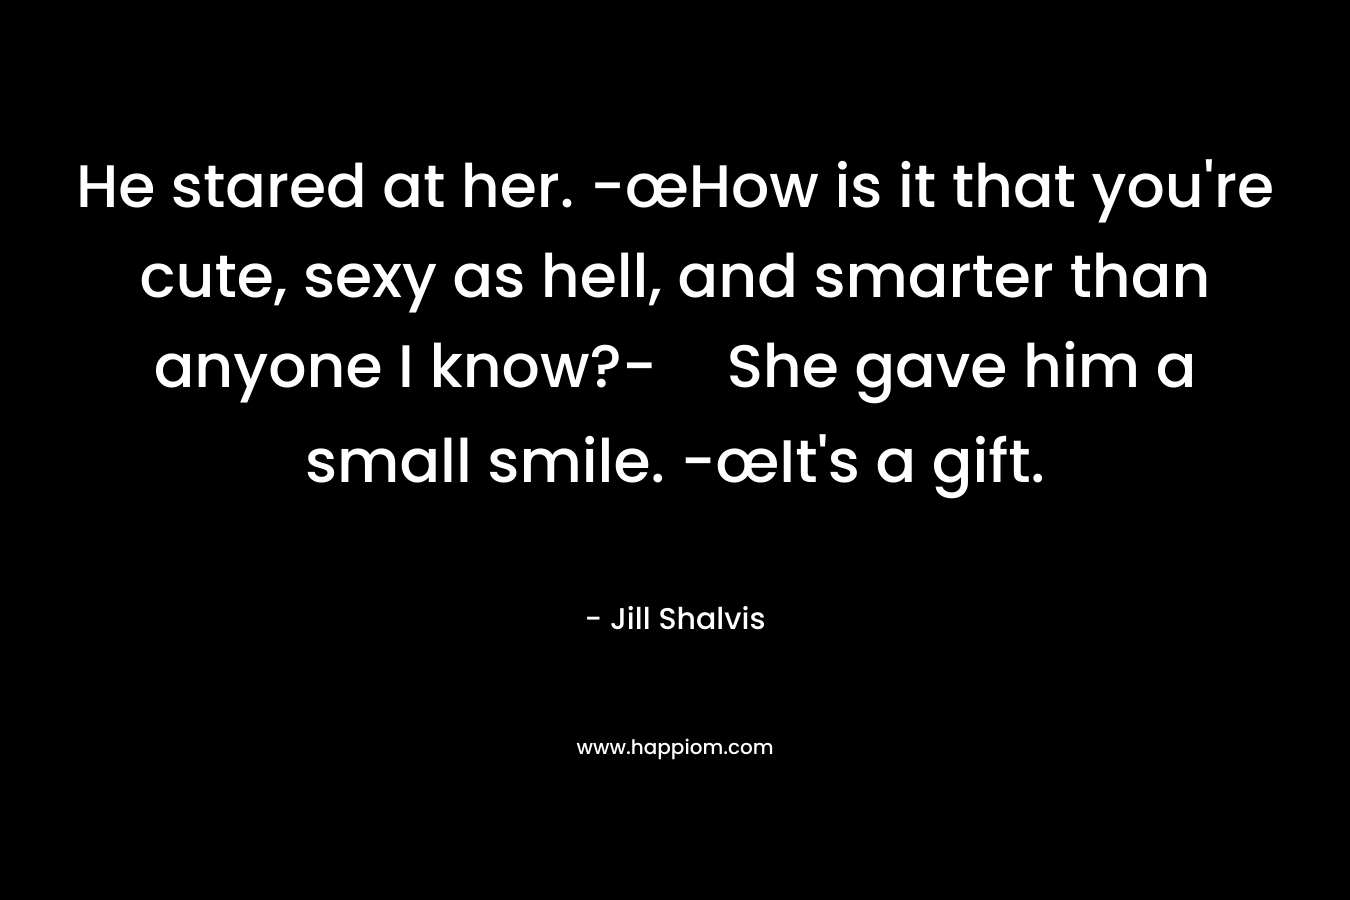 He stared at her. -œHow is it that you're cute, sexy as hell, and smarter than anyone I know?-She gave him a small smile. -œIt's a gift.